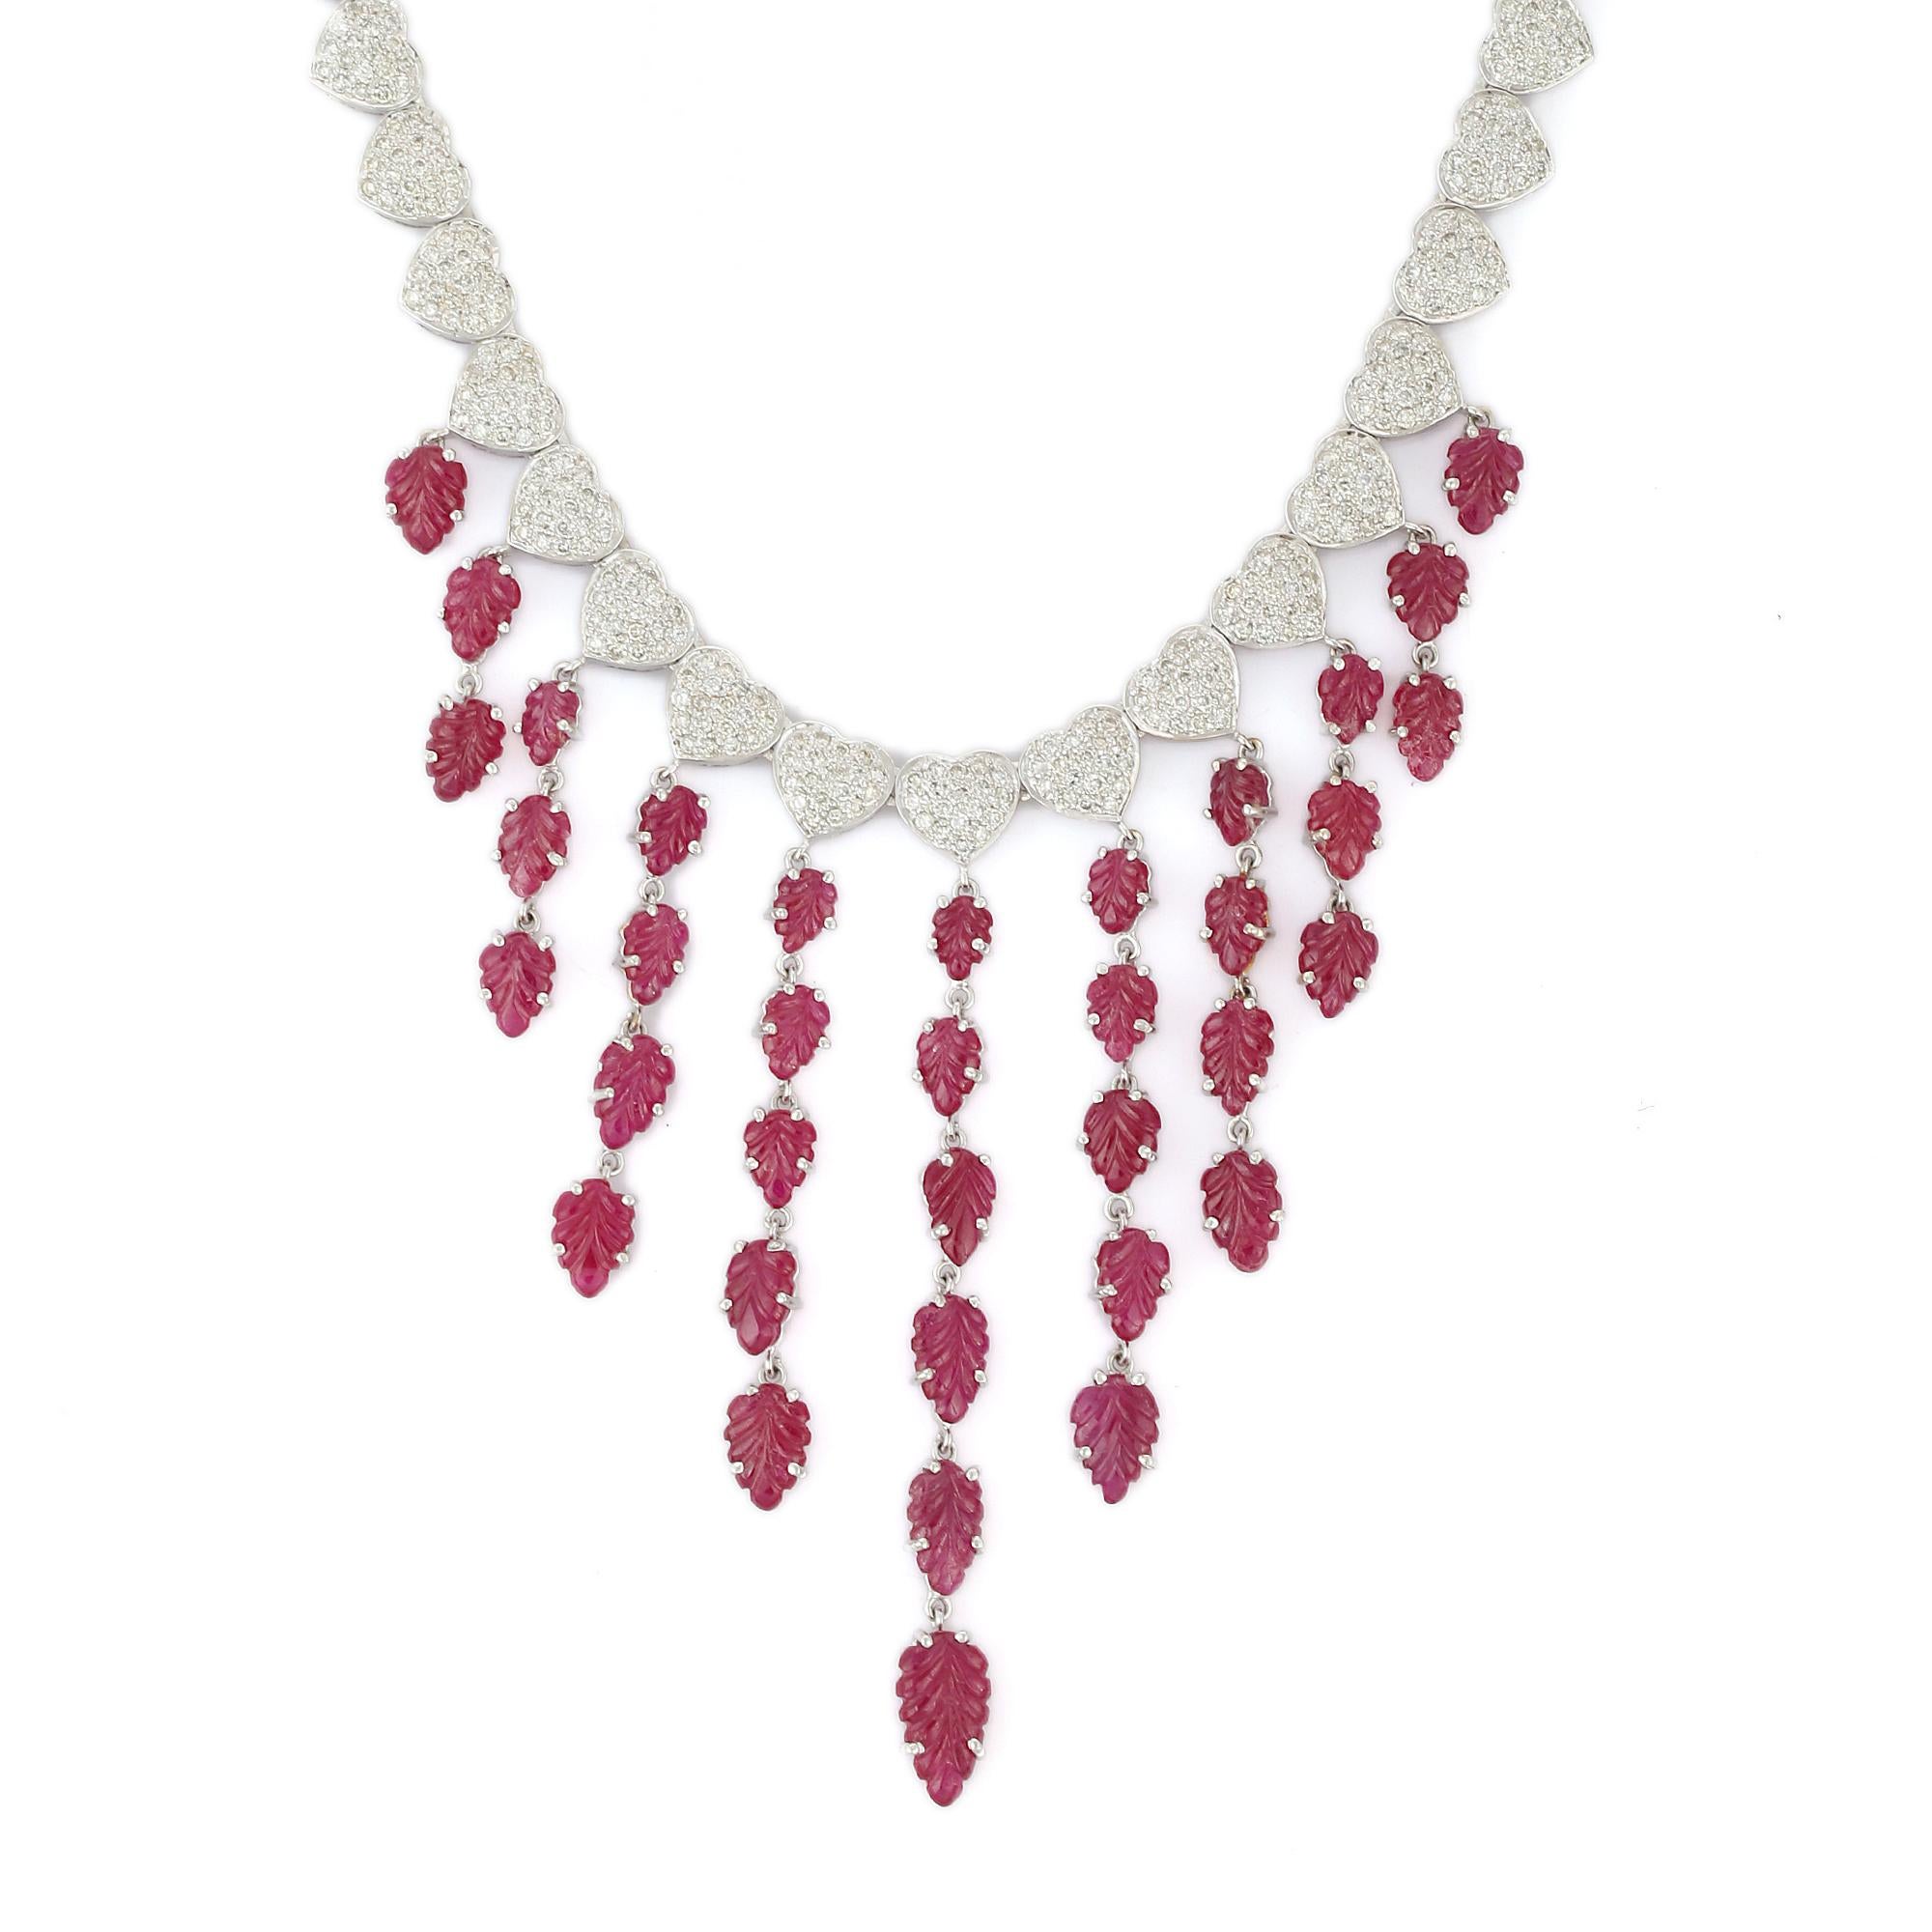 Modern 20.5 Carat Ruby and Diamond Drop Necklace in 18K White Gold For Sale